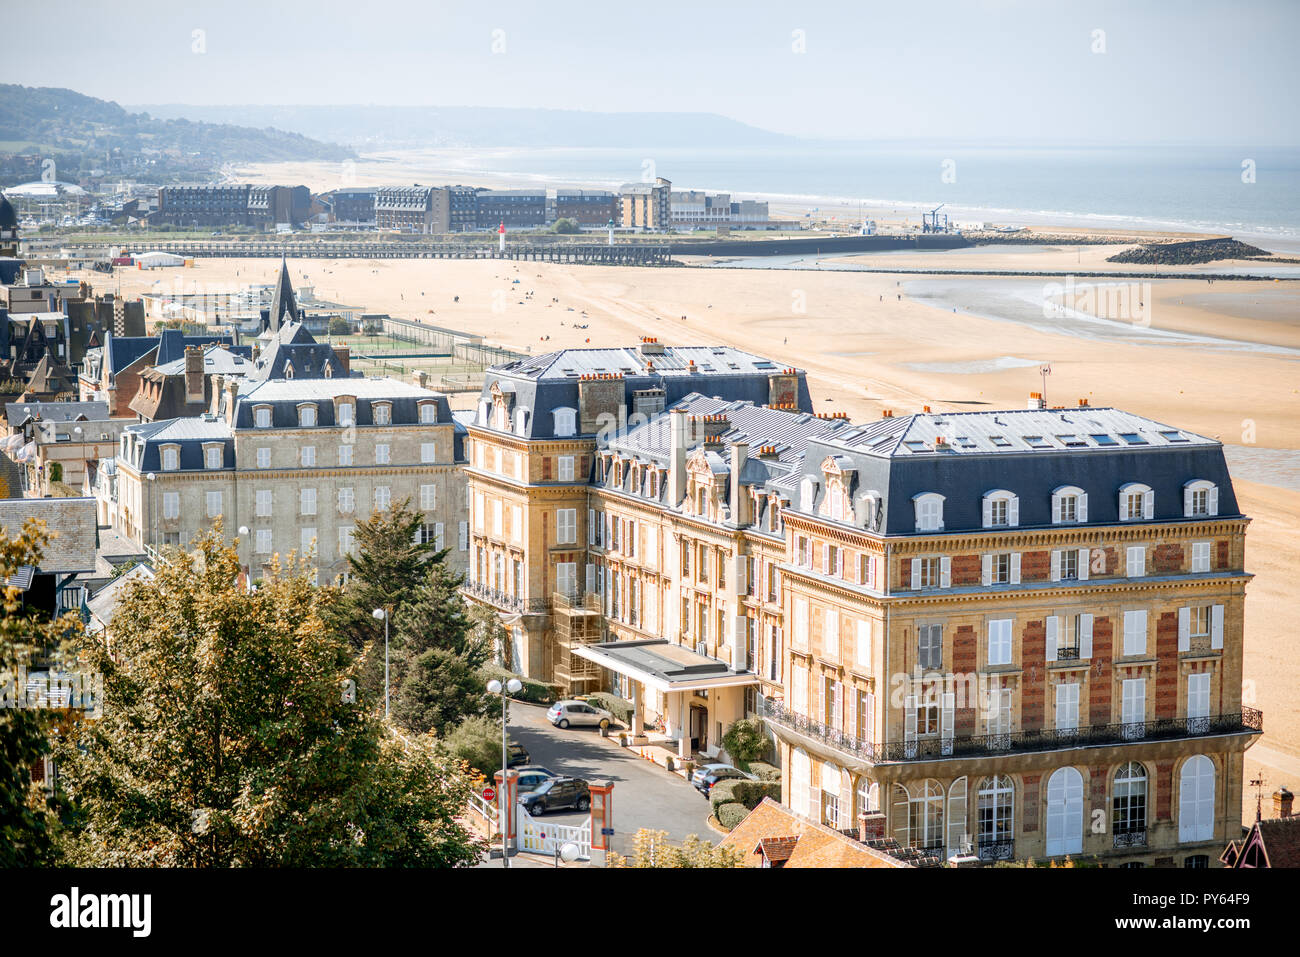 Luxury houses on the coastline with beautiful beach on the background in Trouville, famous french town in Normandy Stock Photo